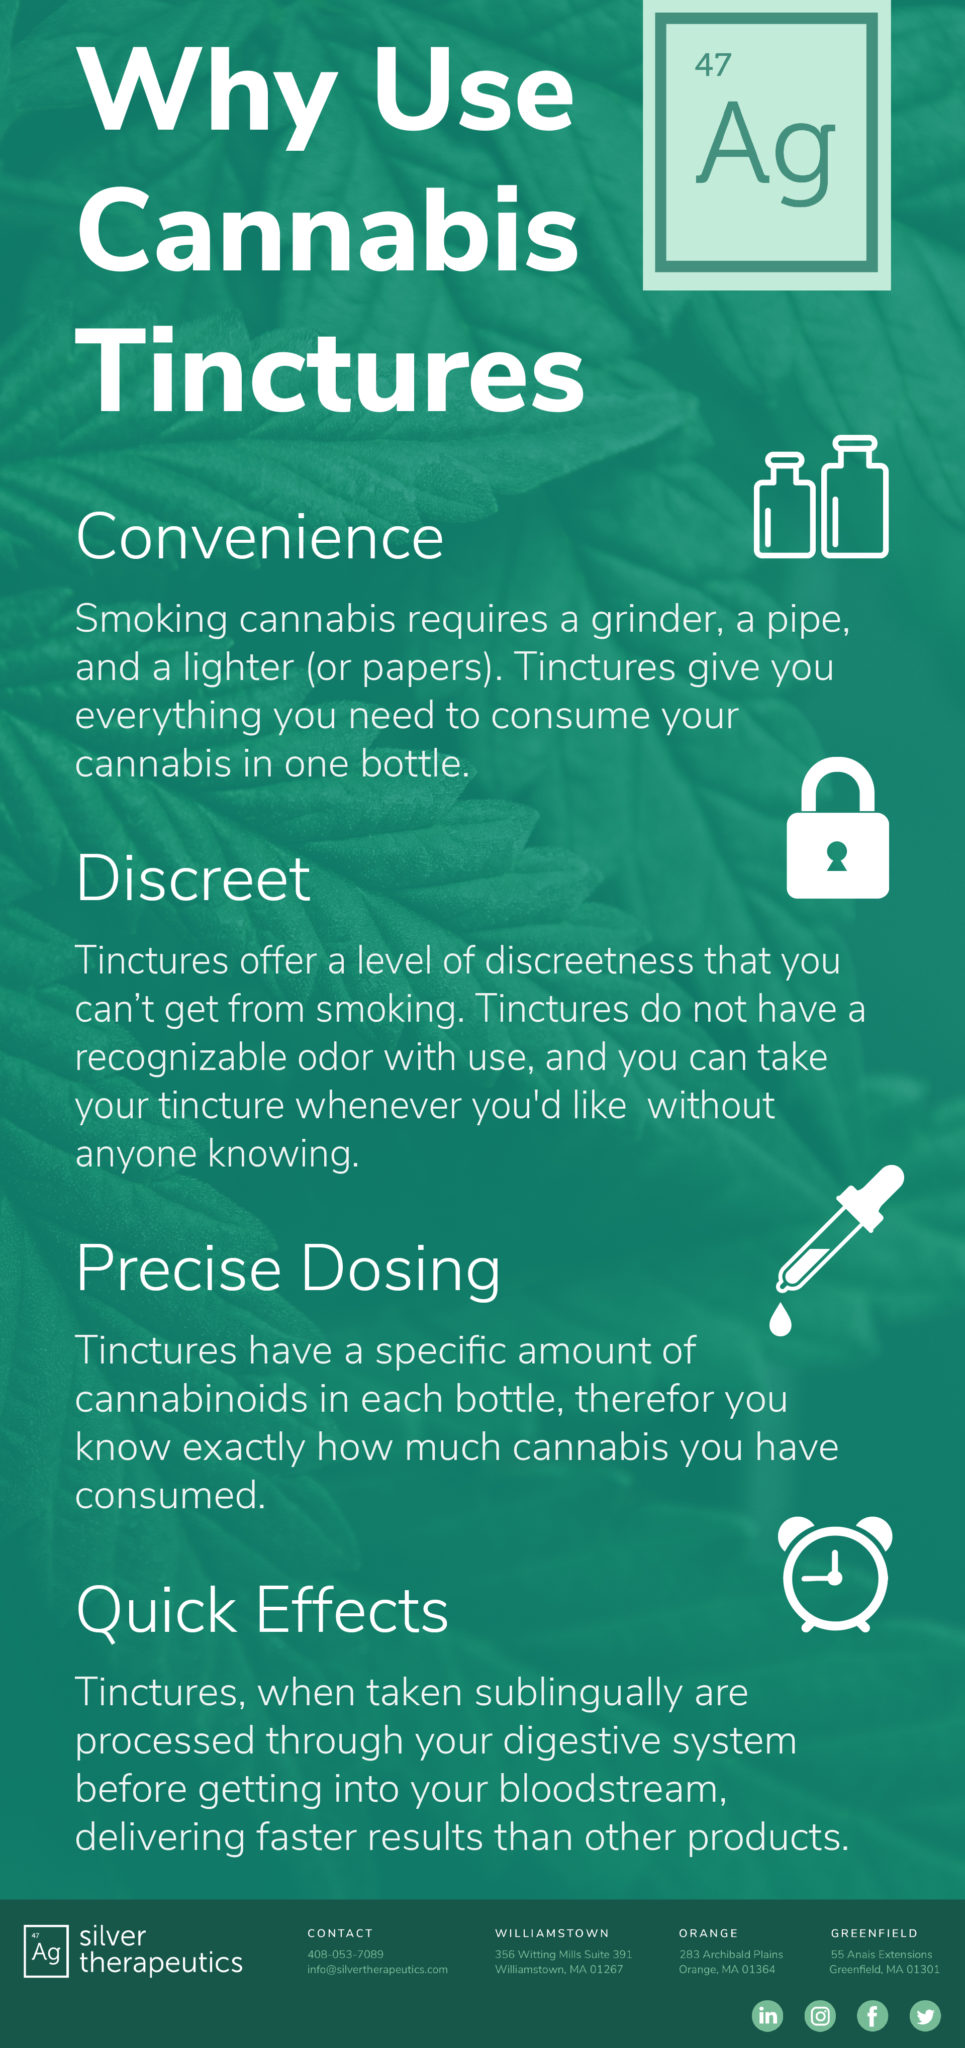 cannabis tincture 101 infographic | 4 reasons to use tinctures. 1. convenience 2. they're discreet 3. precise dosing 4. quick effects